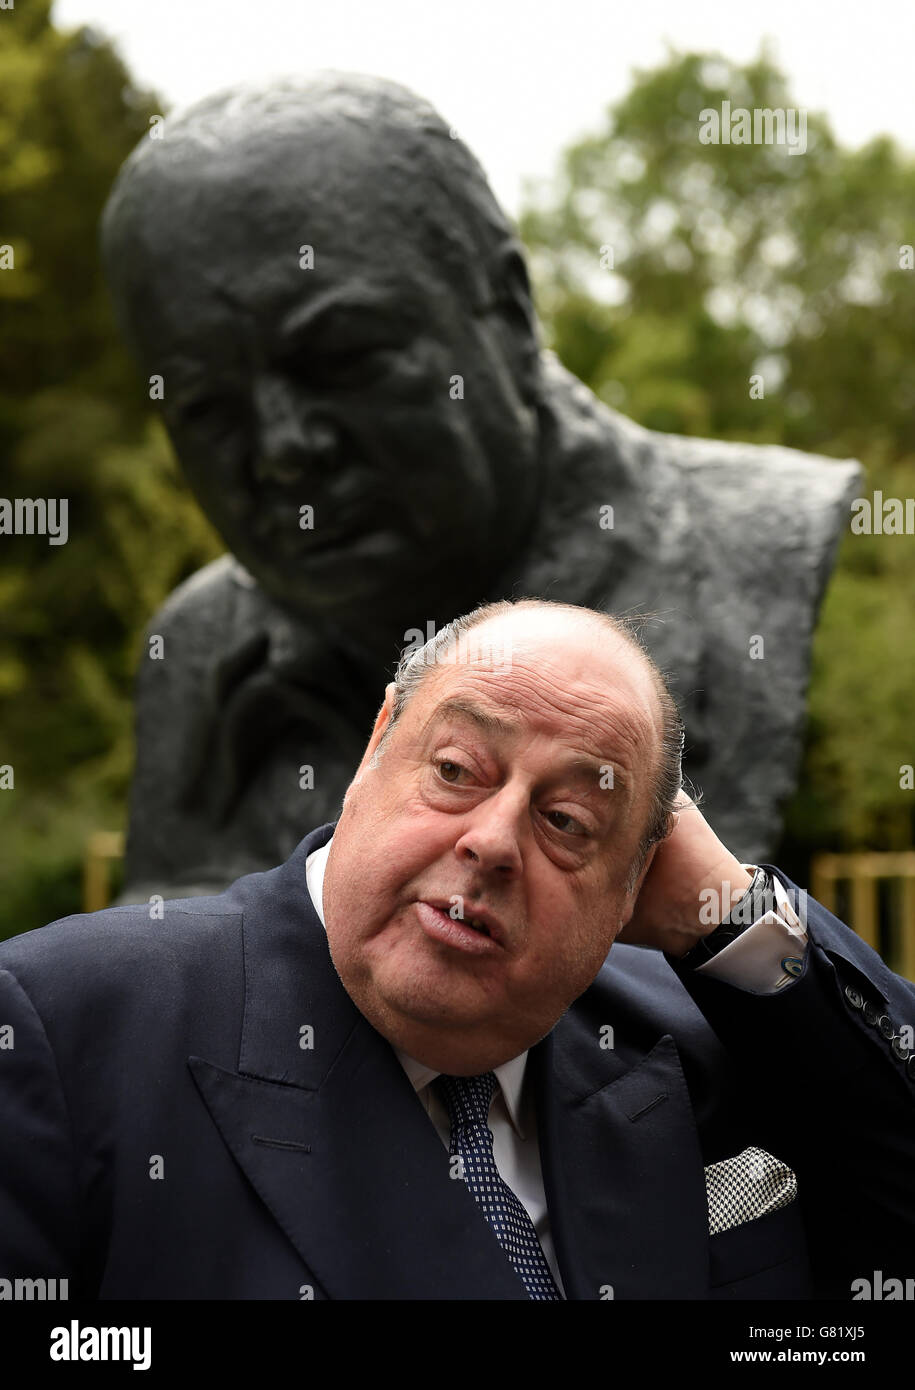 Sir Nicholas Soames MP after the unveiling of a bust of Sir Winston Churchill in the grounds of Blenheim Palace, Oxfordshire. Stock Photo